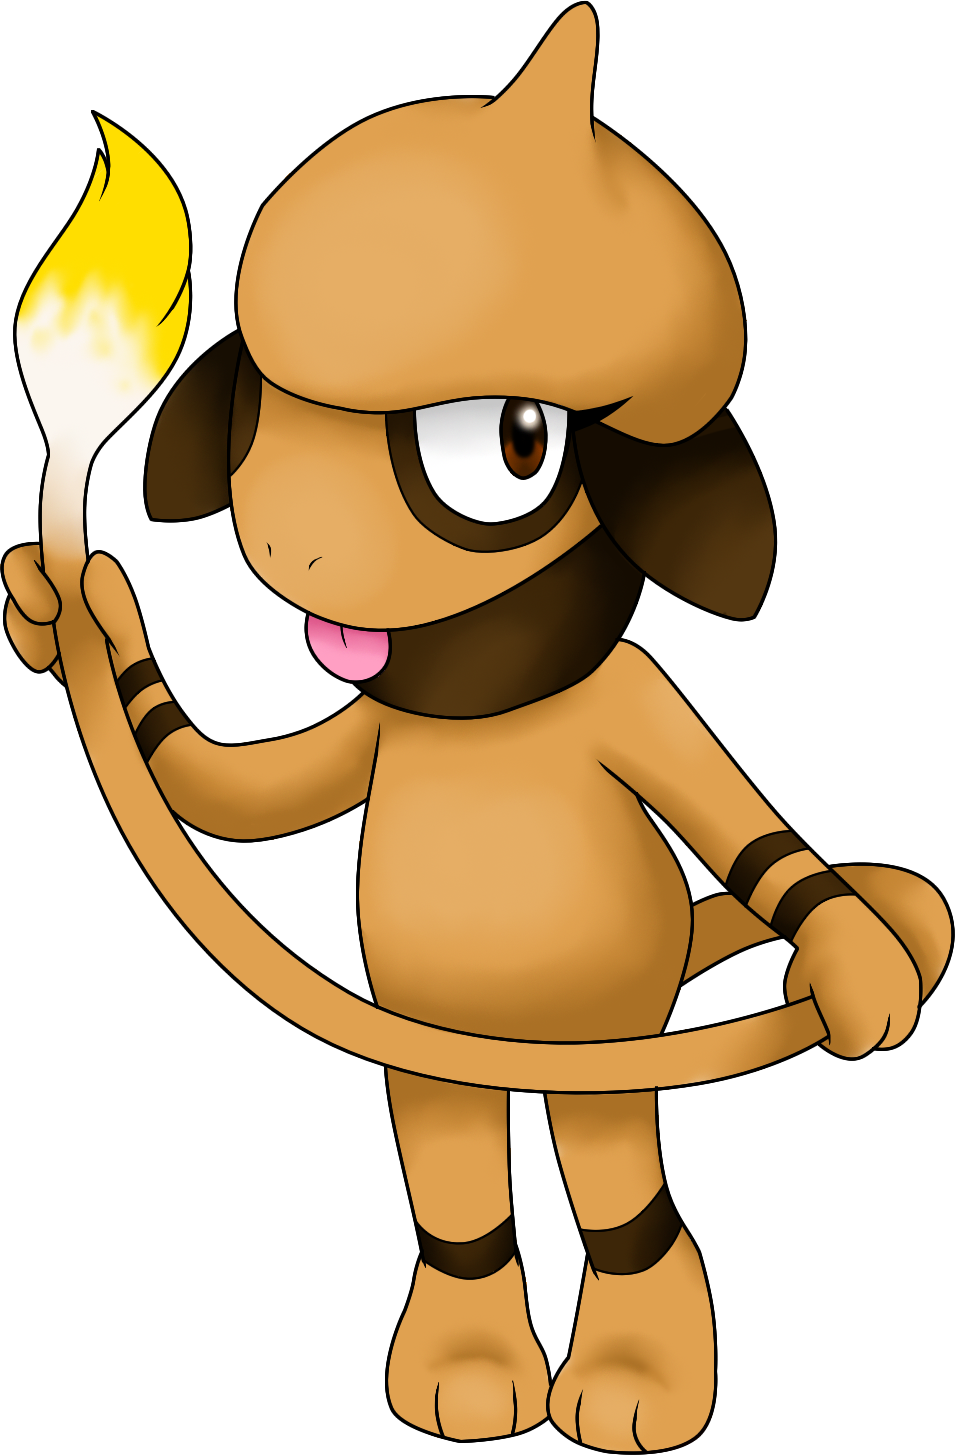 Smeargle Artist Photos Download Jpg Png Gif Raw Tiff Psd Pdf And Watch Online